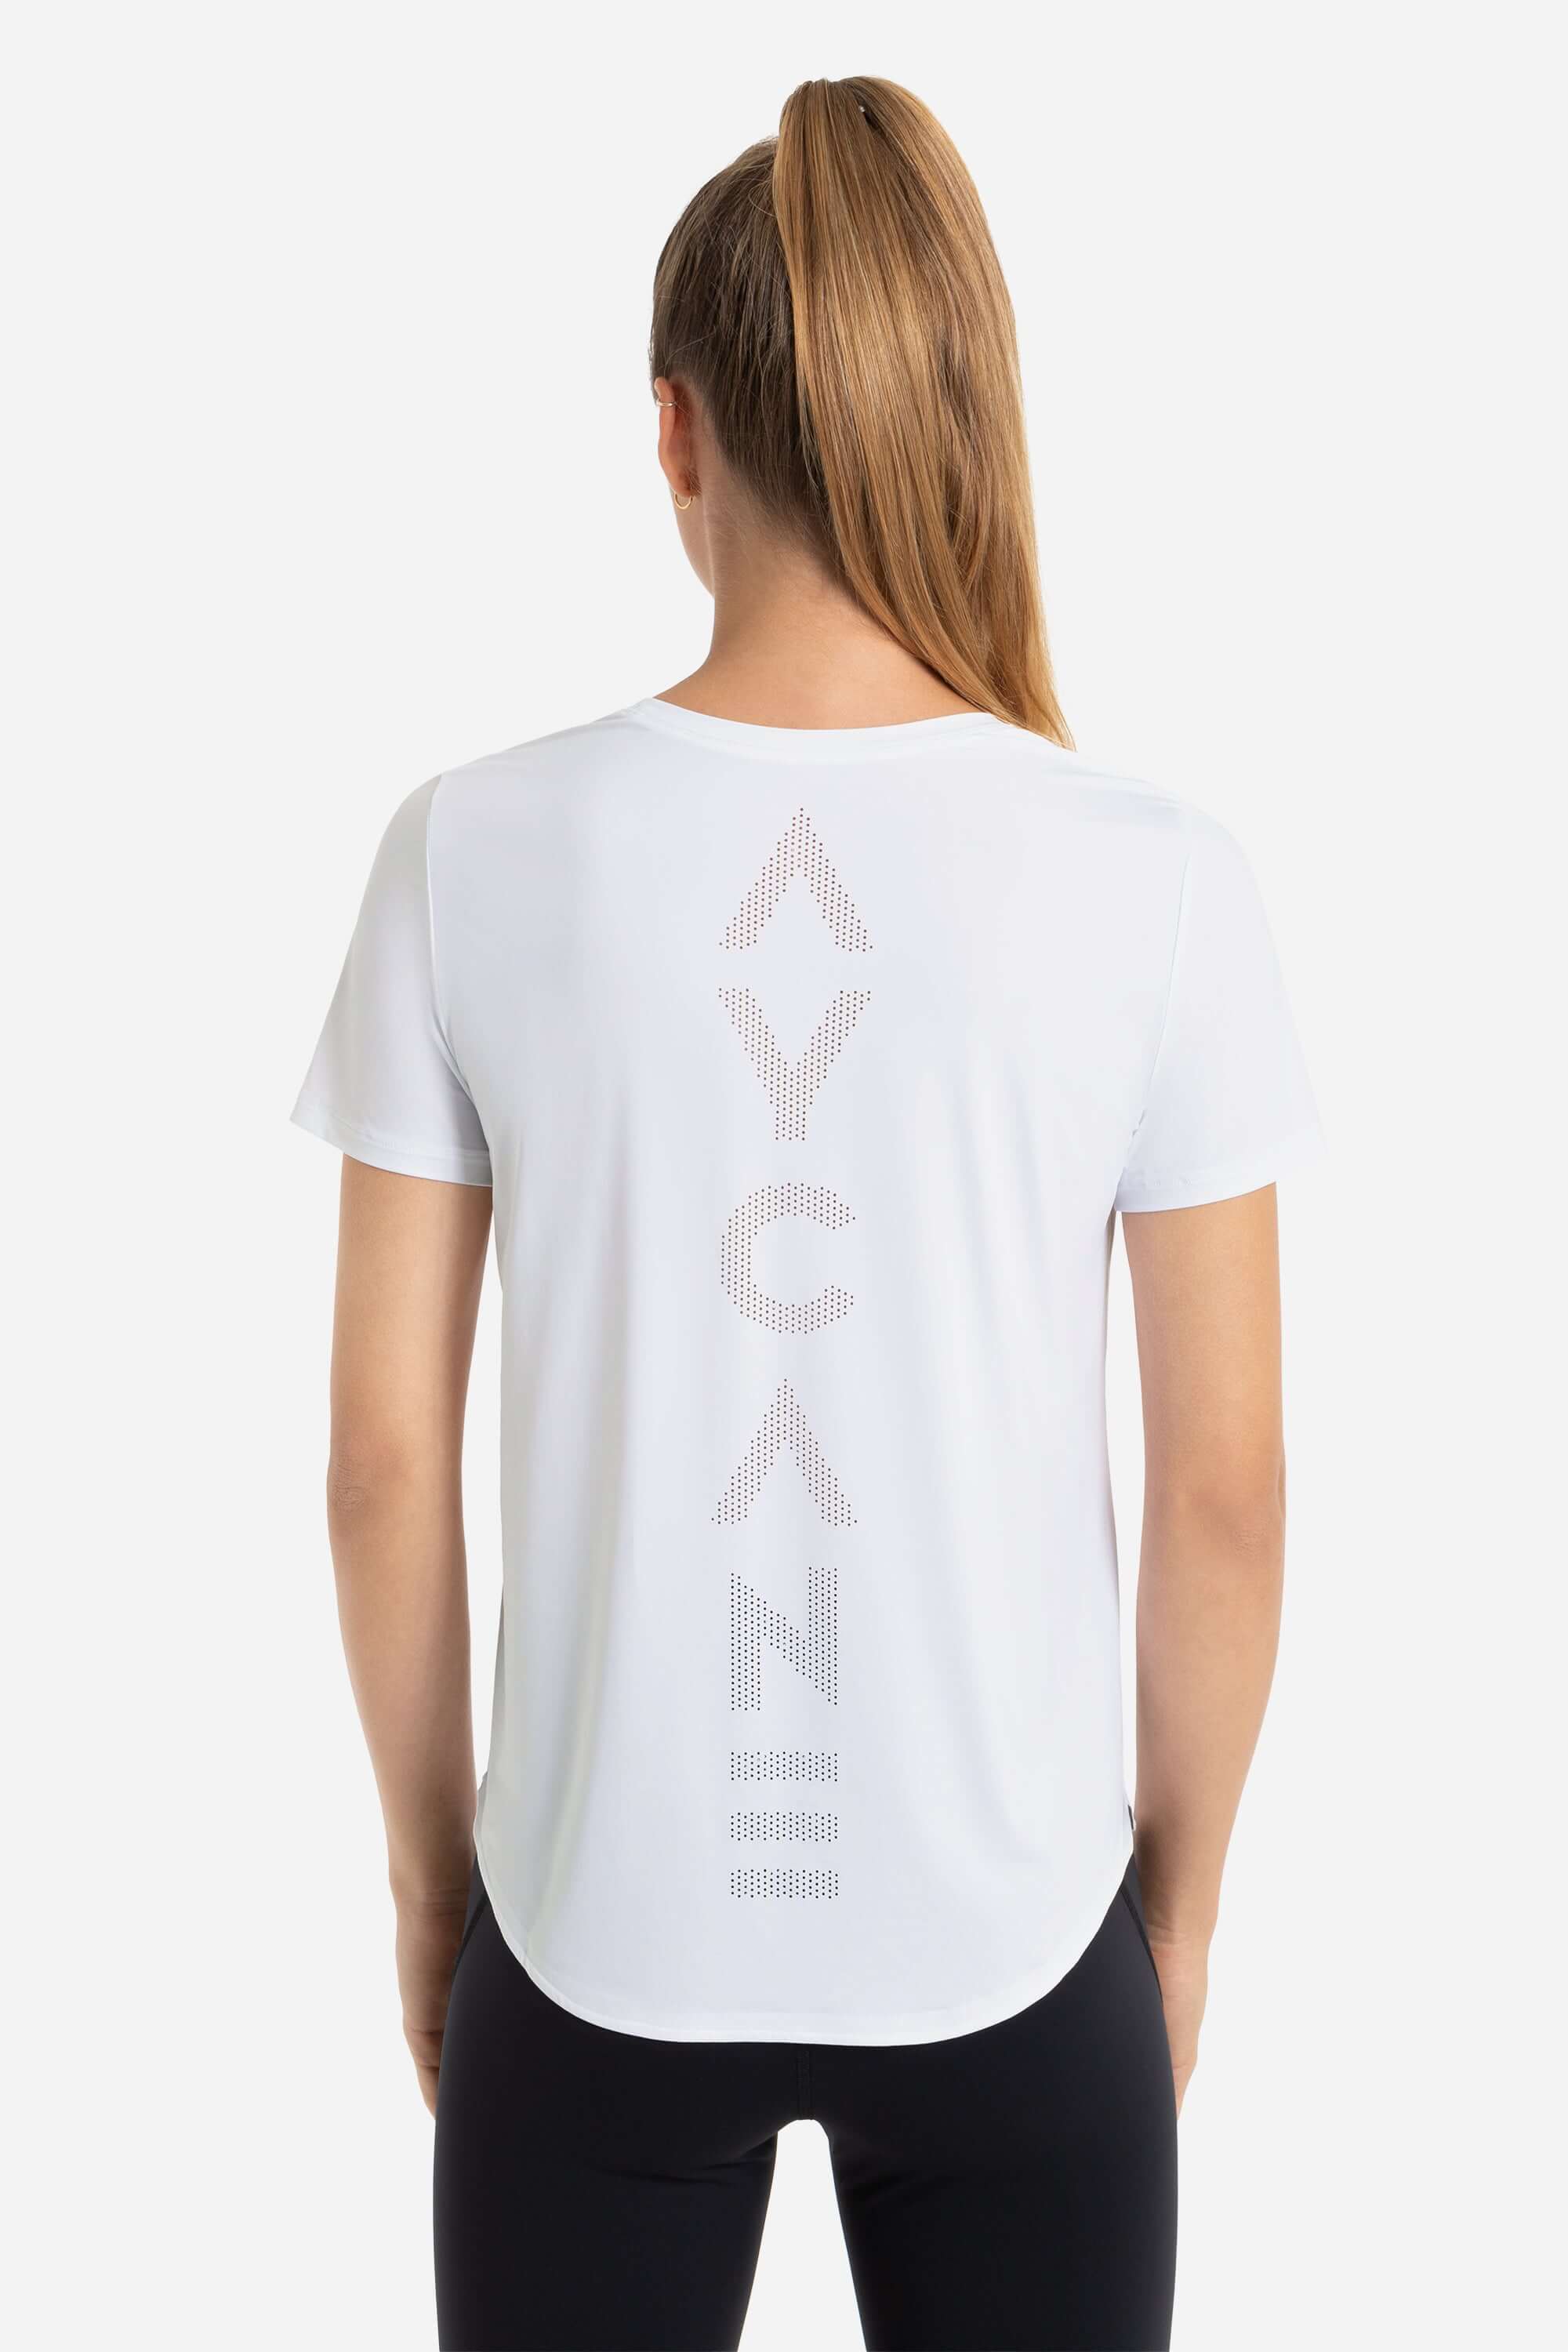 Women wearing a training t-shirt short sleeve in white and gym leggings in black from AYCANE